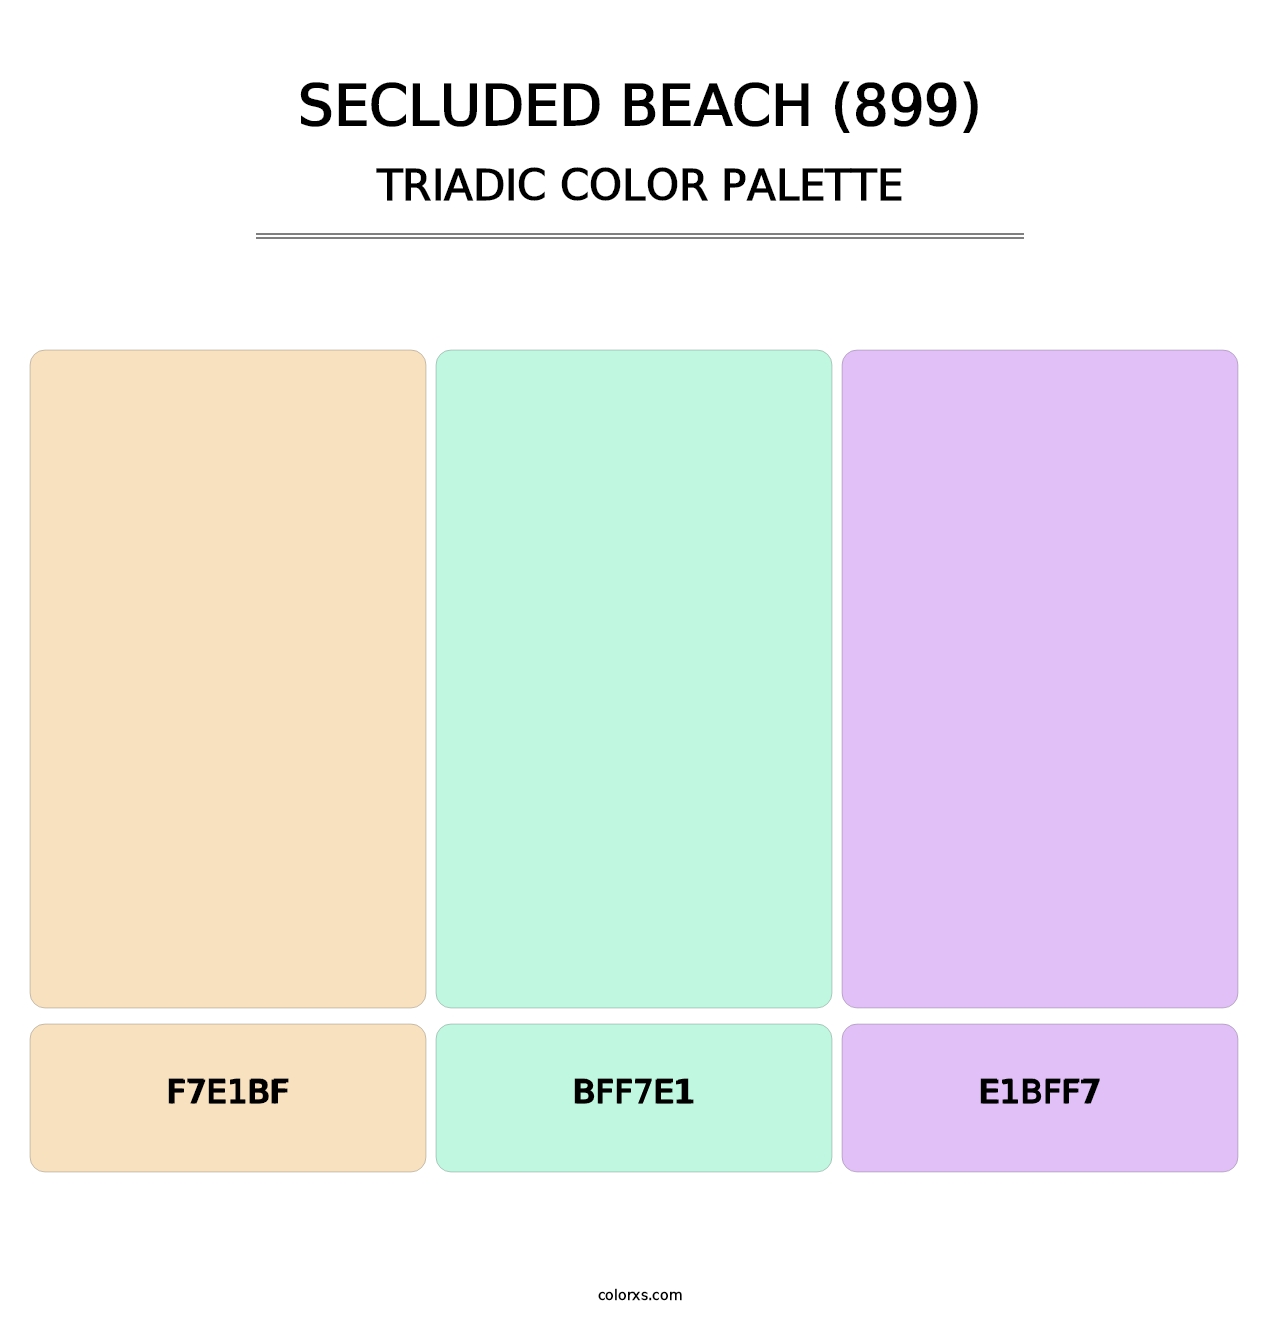 Secluded Beach (899) - Triadic Color Palette